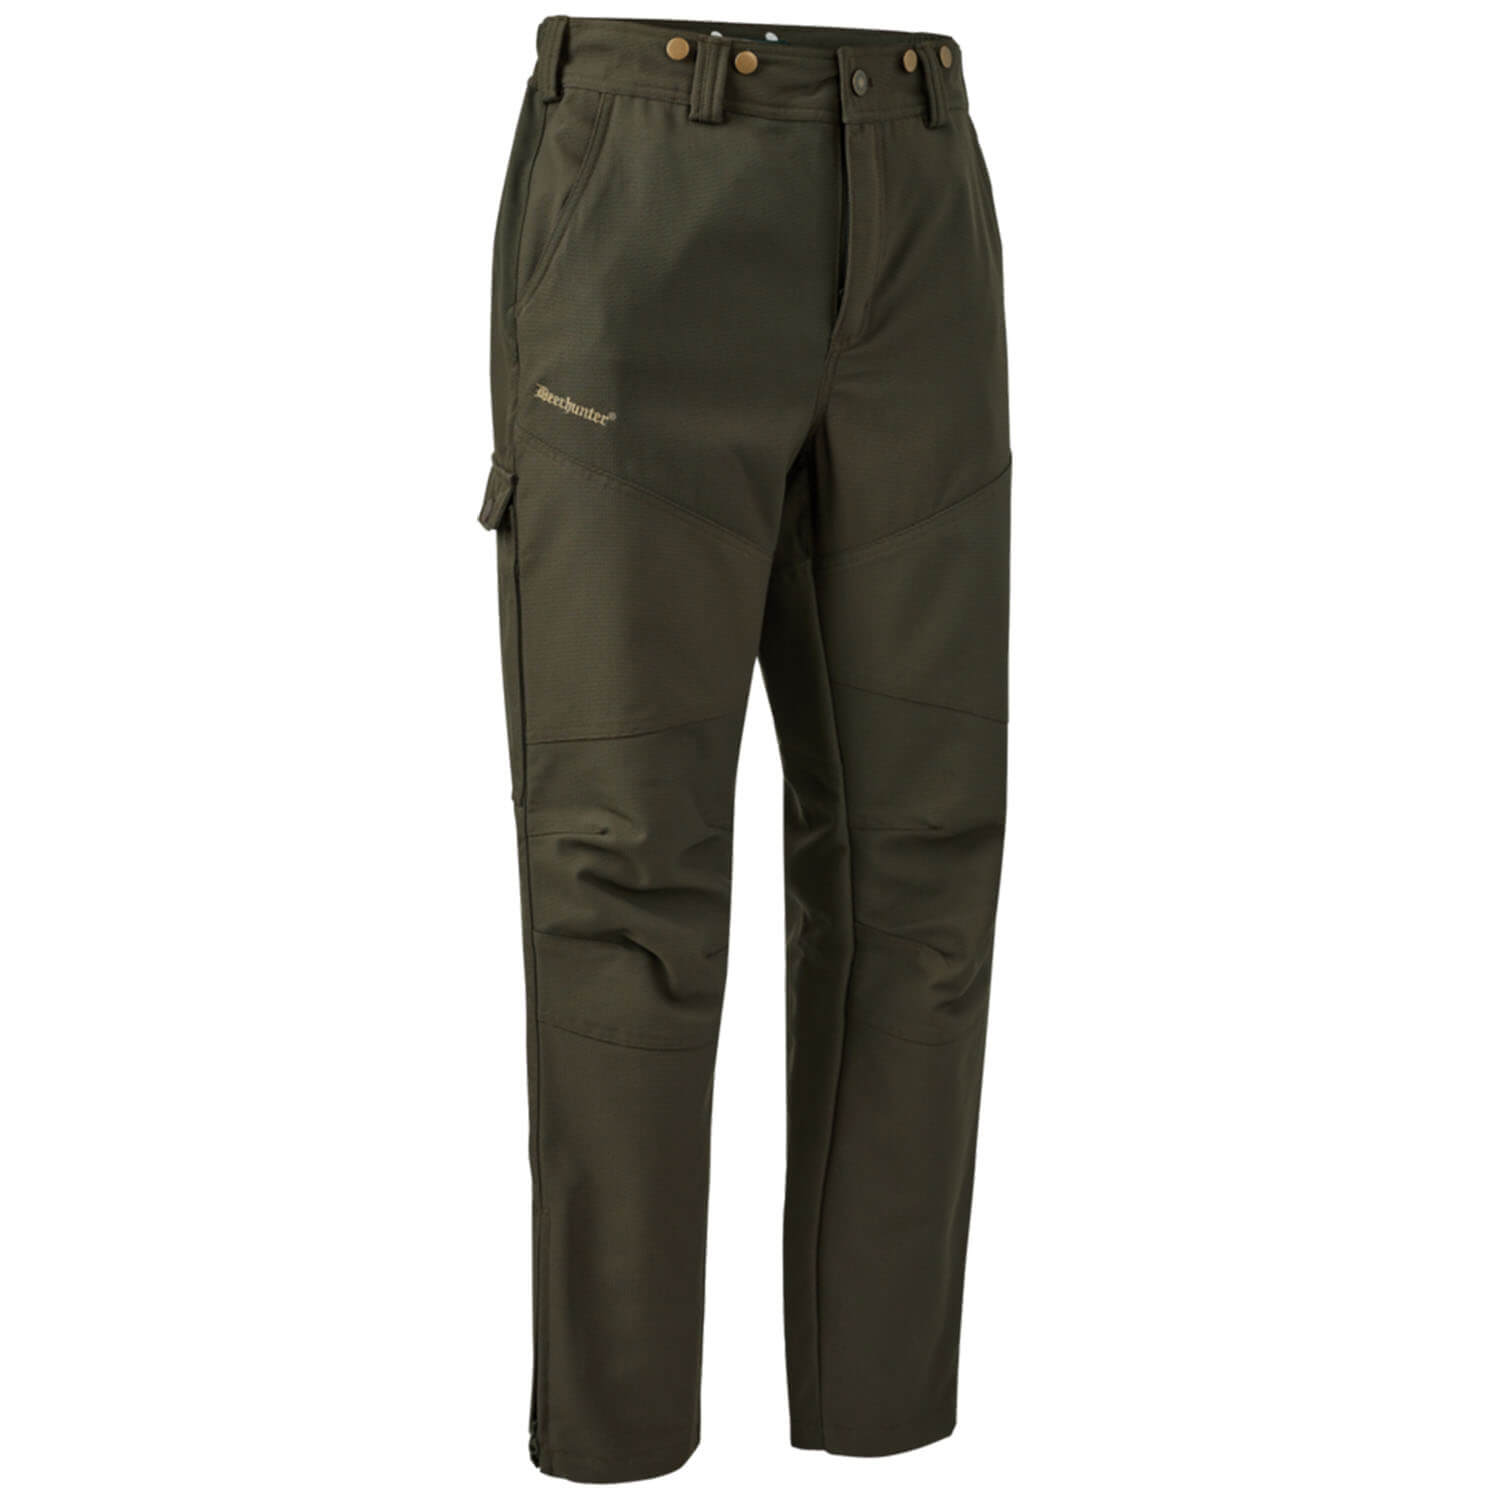 Deerhunter Boot Trousers Strike Extreme (Palm Green) - Hunting Trousers